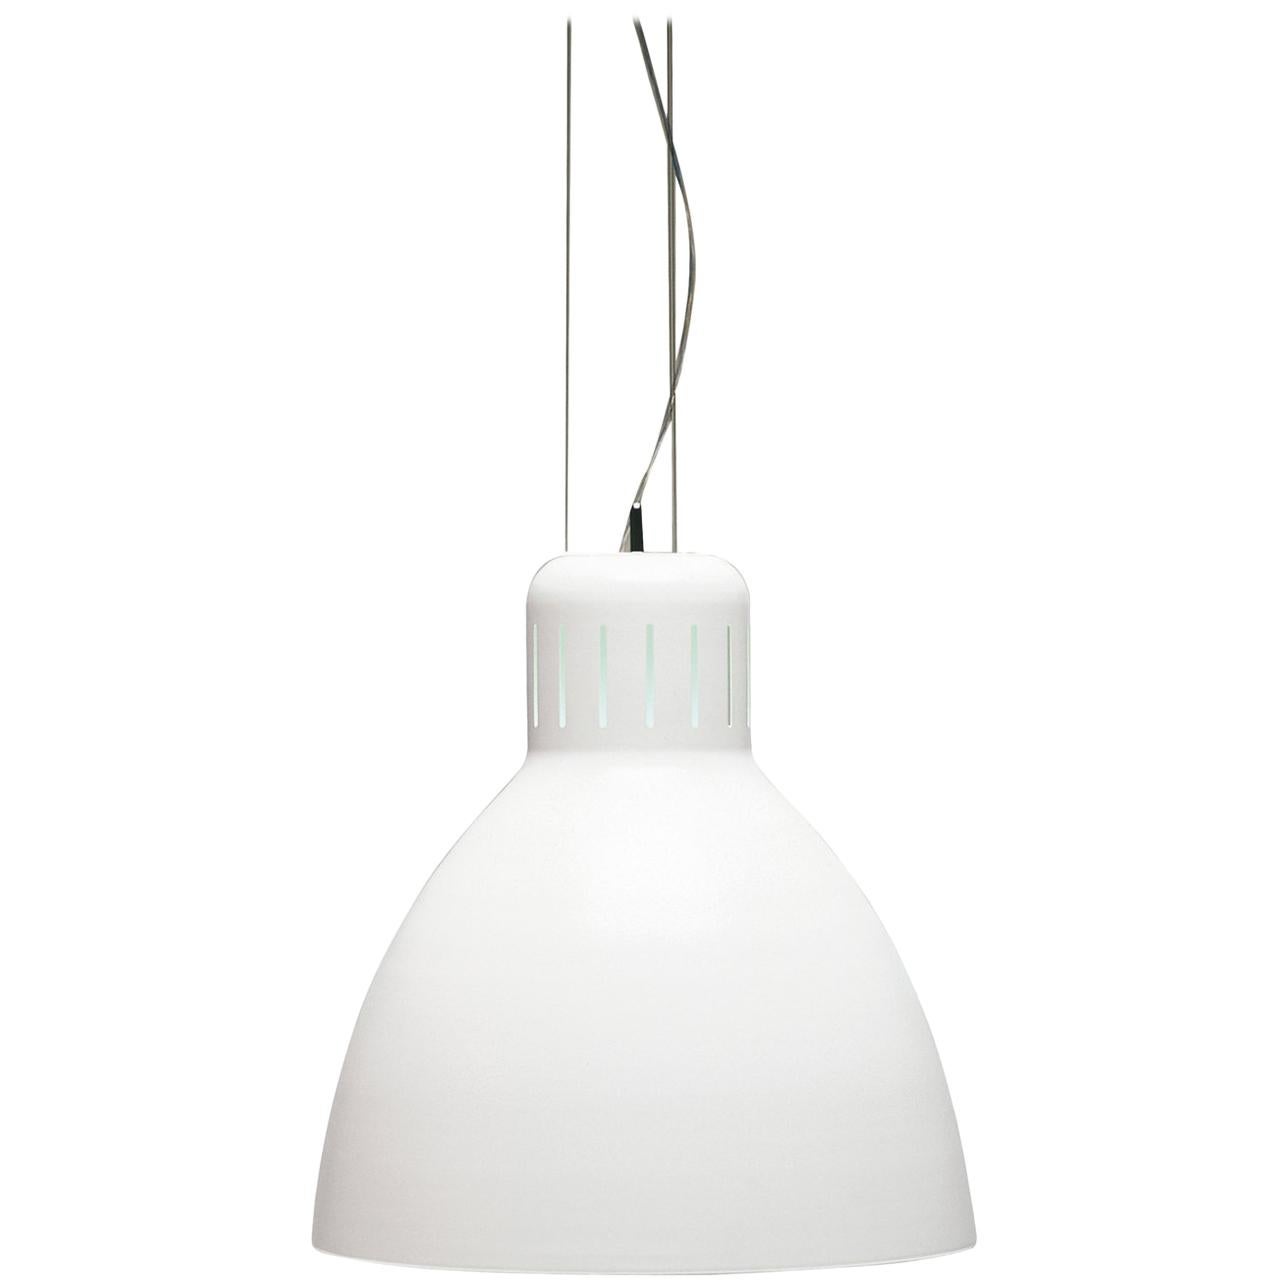 Italian Leucos The Great JJ S Pendant Light in Glossy White by Leucos Design Lab For Sale